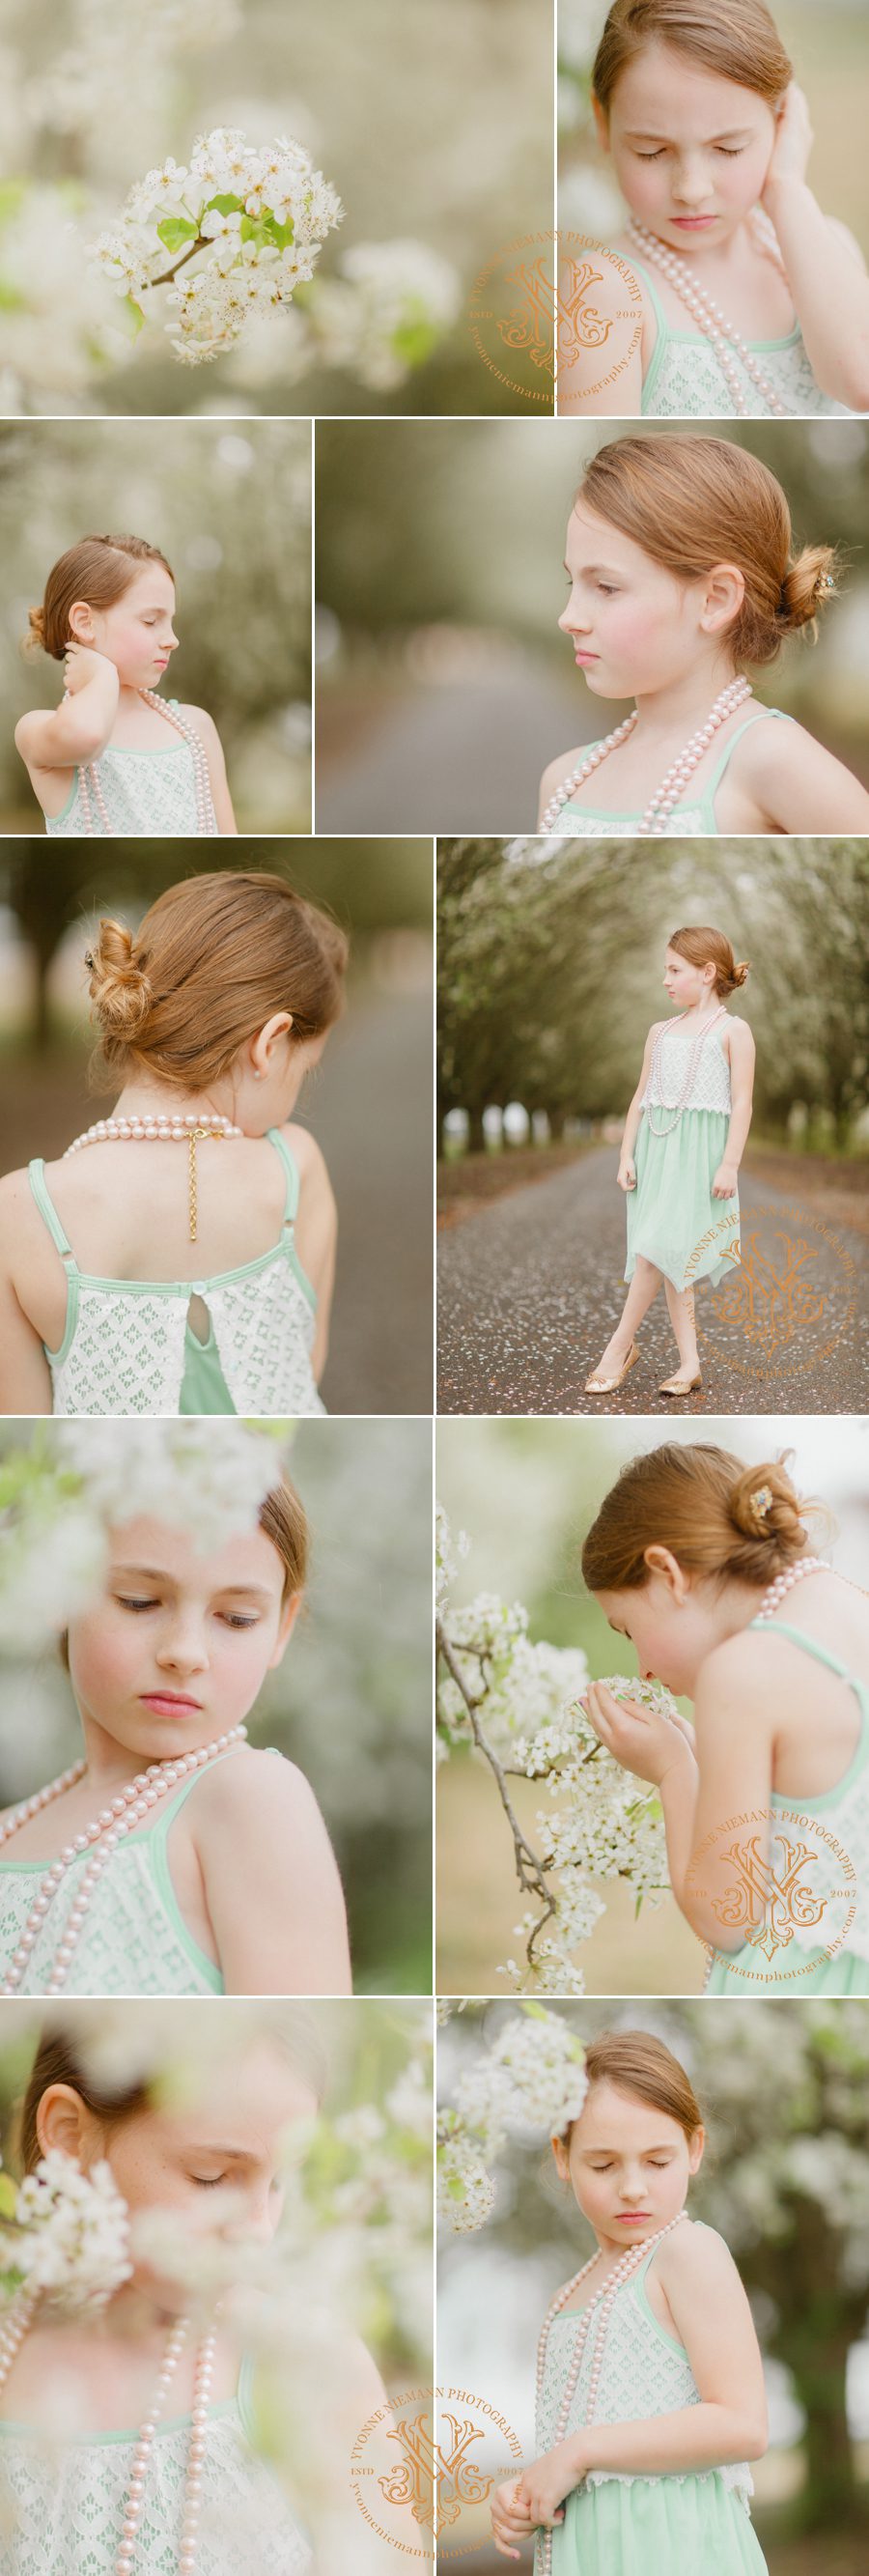 Beautiful Spring portraits of a 2nd grader among pear trees in Bishop, GA taken by Yvonne Niemann Photography.